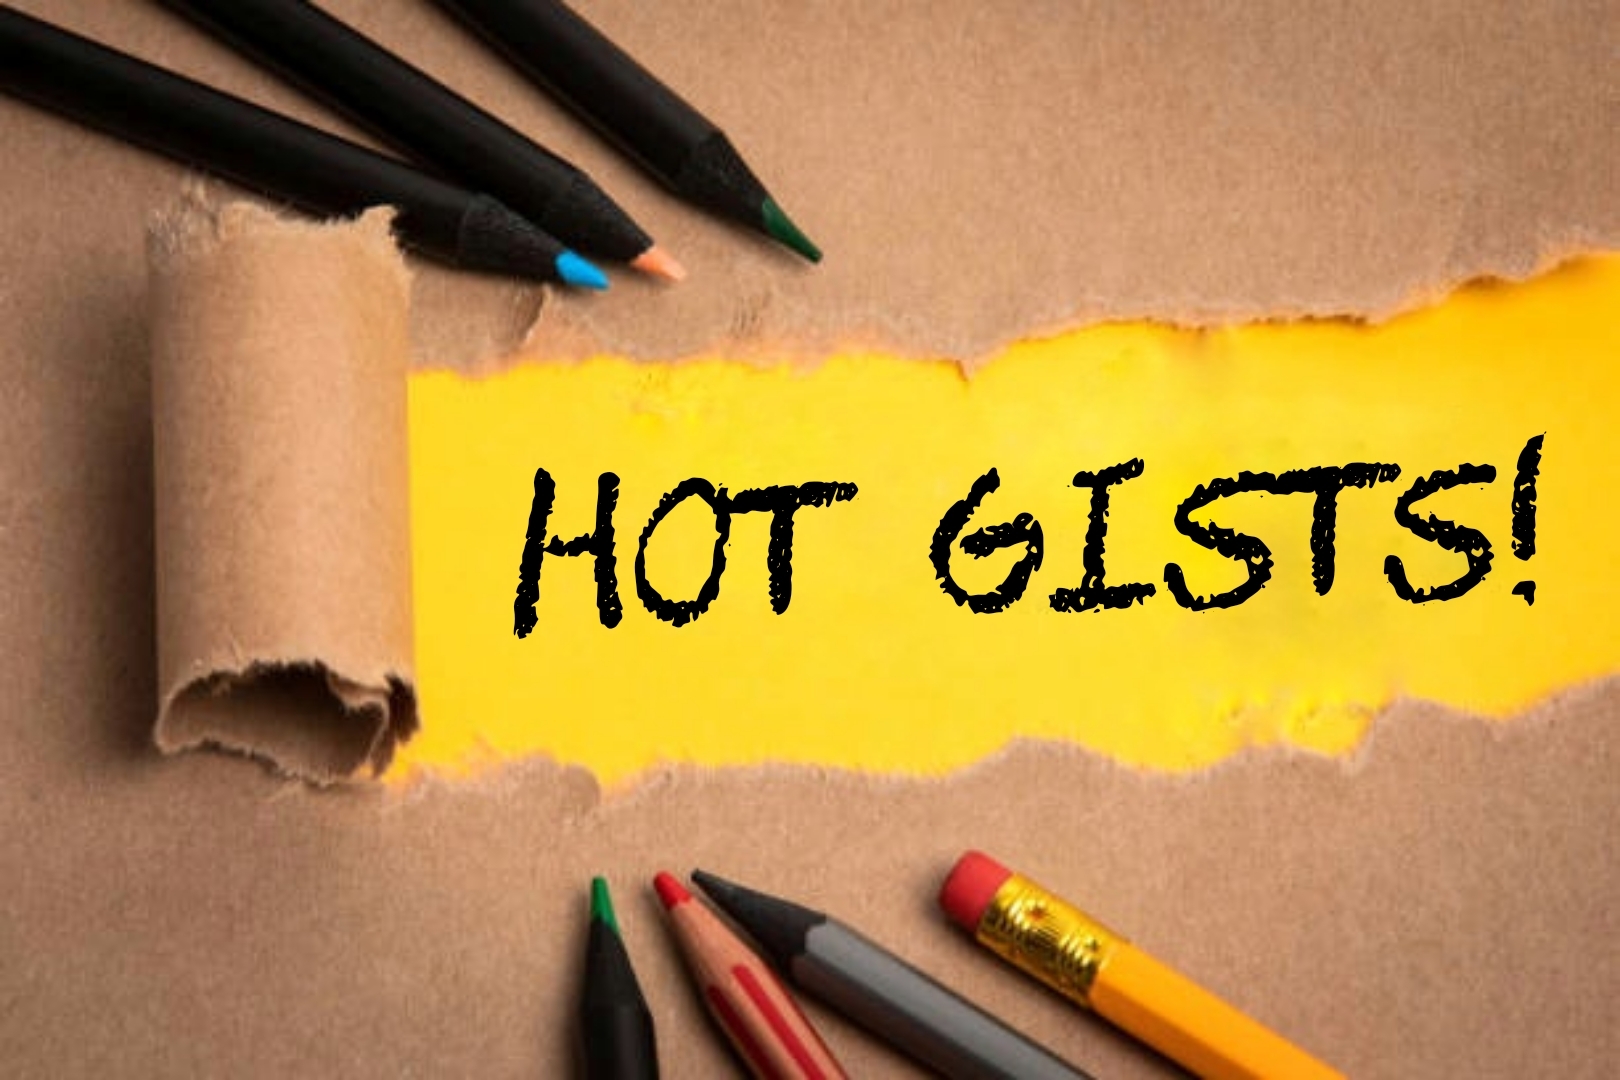 Lifestyle: All the Hottest gists for you